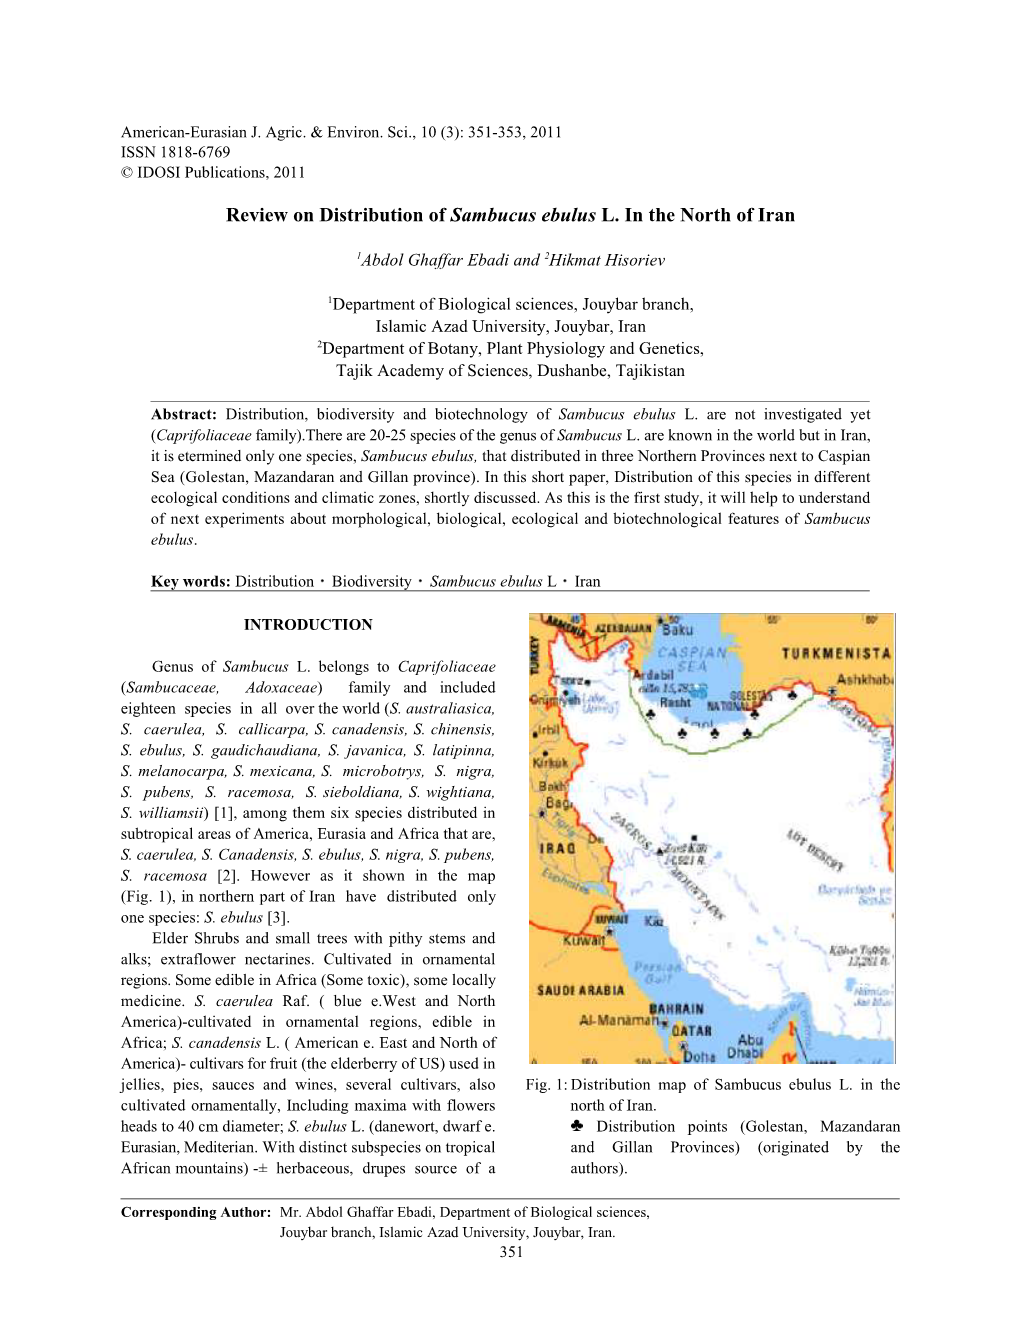 Review on Distribution of Sambucus Ebulus L. in the North of Iran